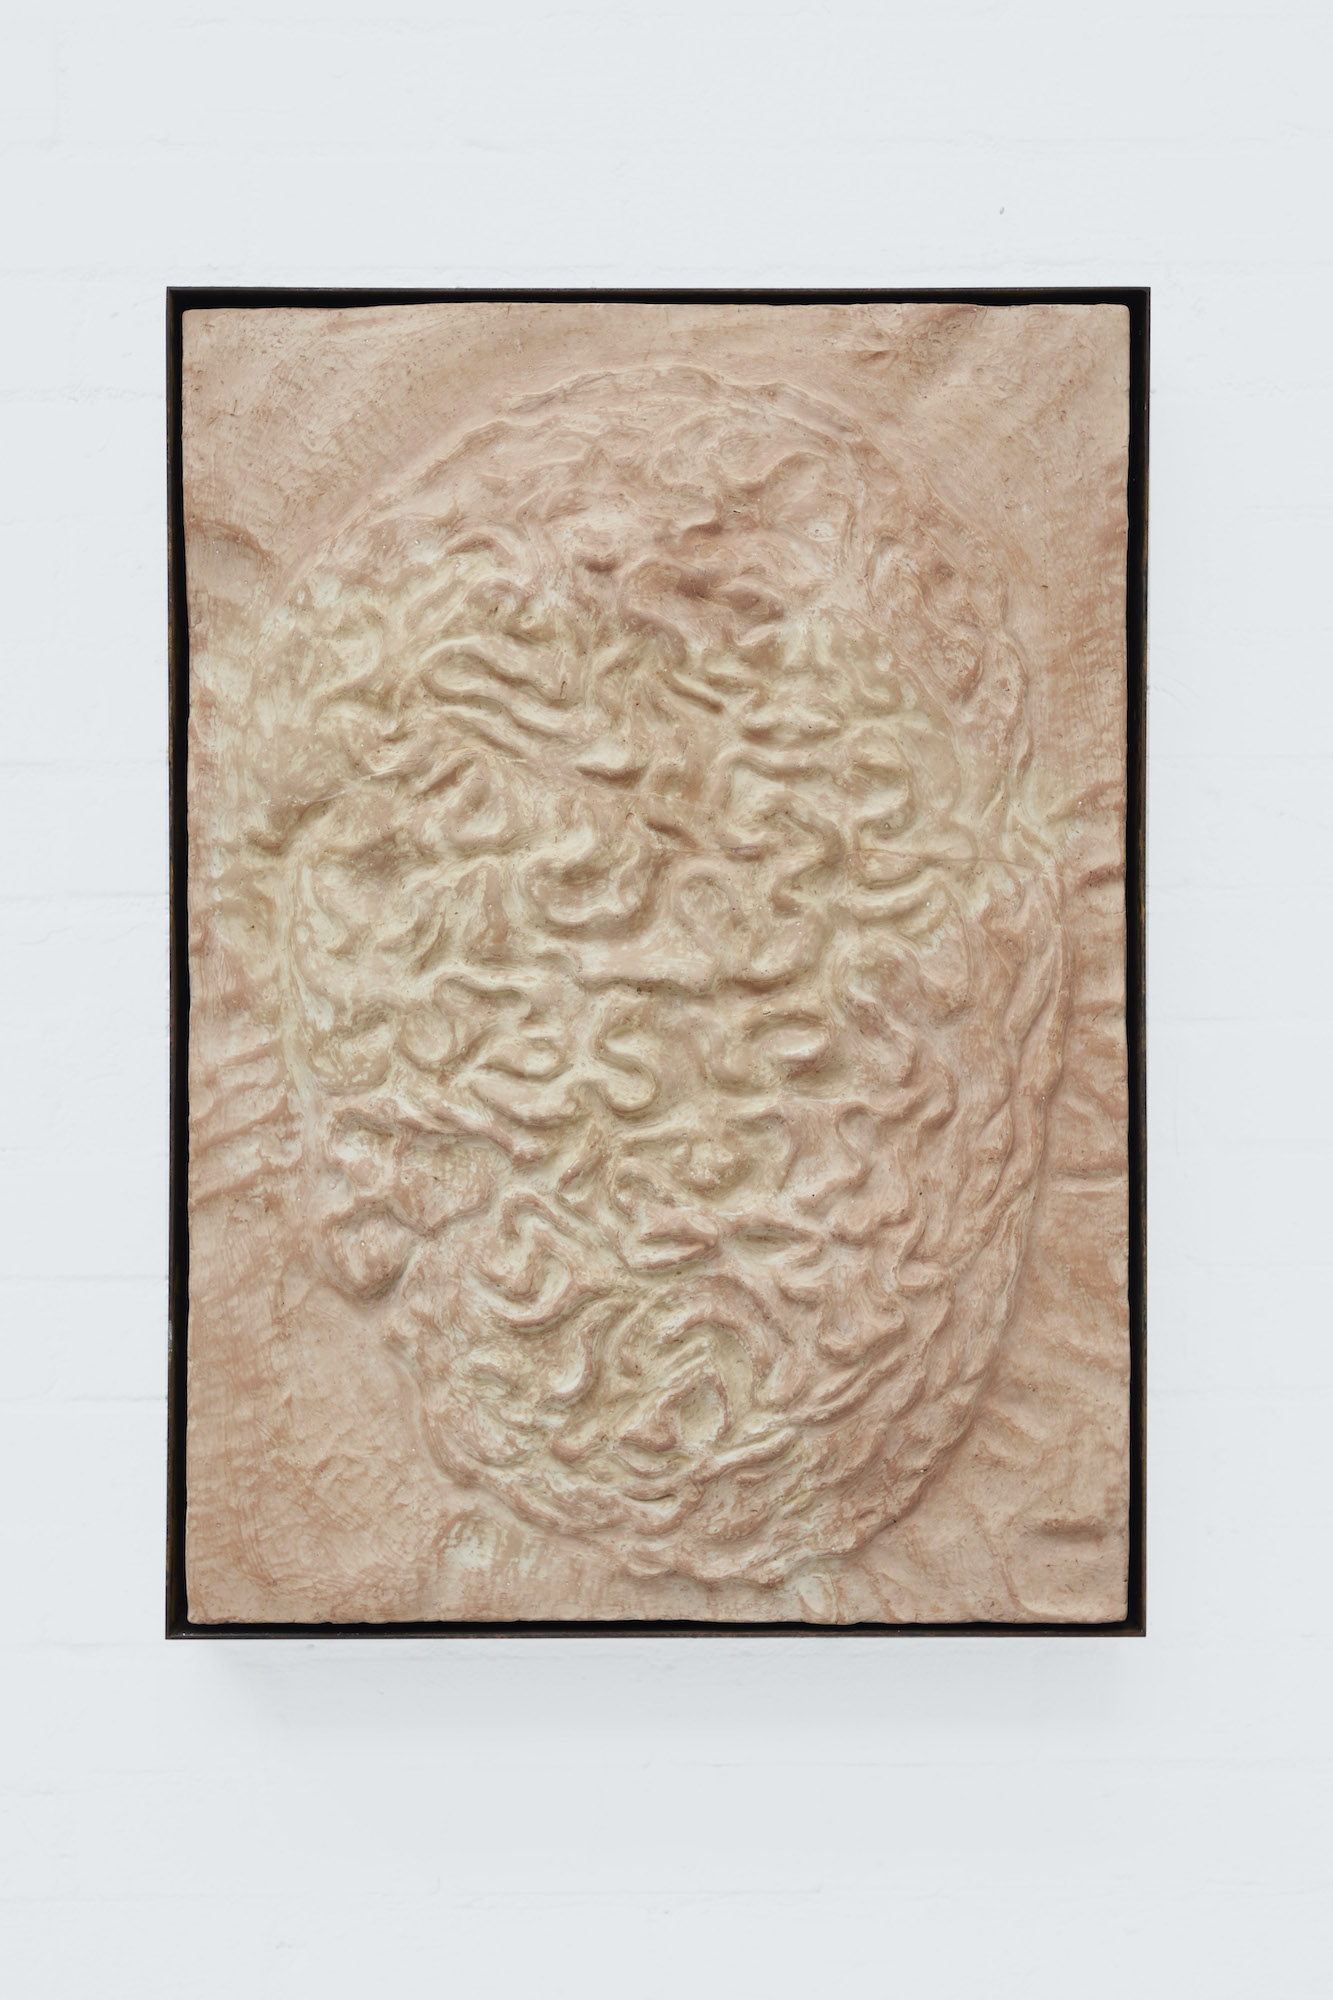 A light pink and cream - colored relief sculpture with a rough textures surface and encased by rectangular steel frame.